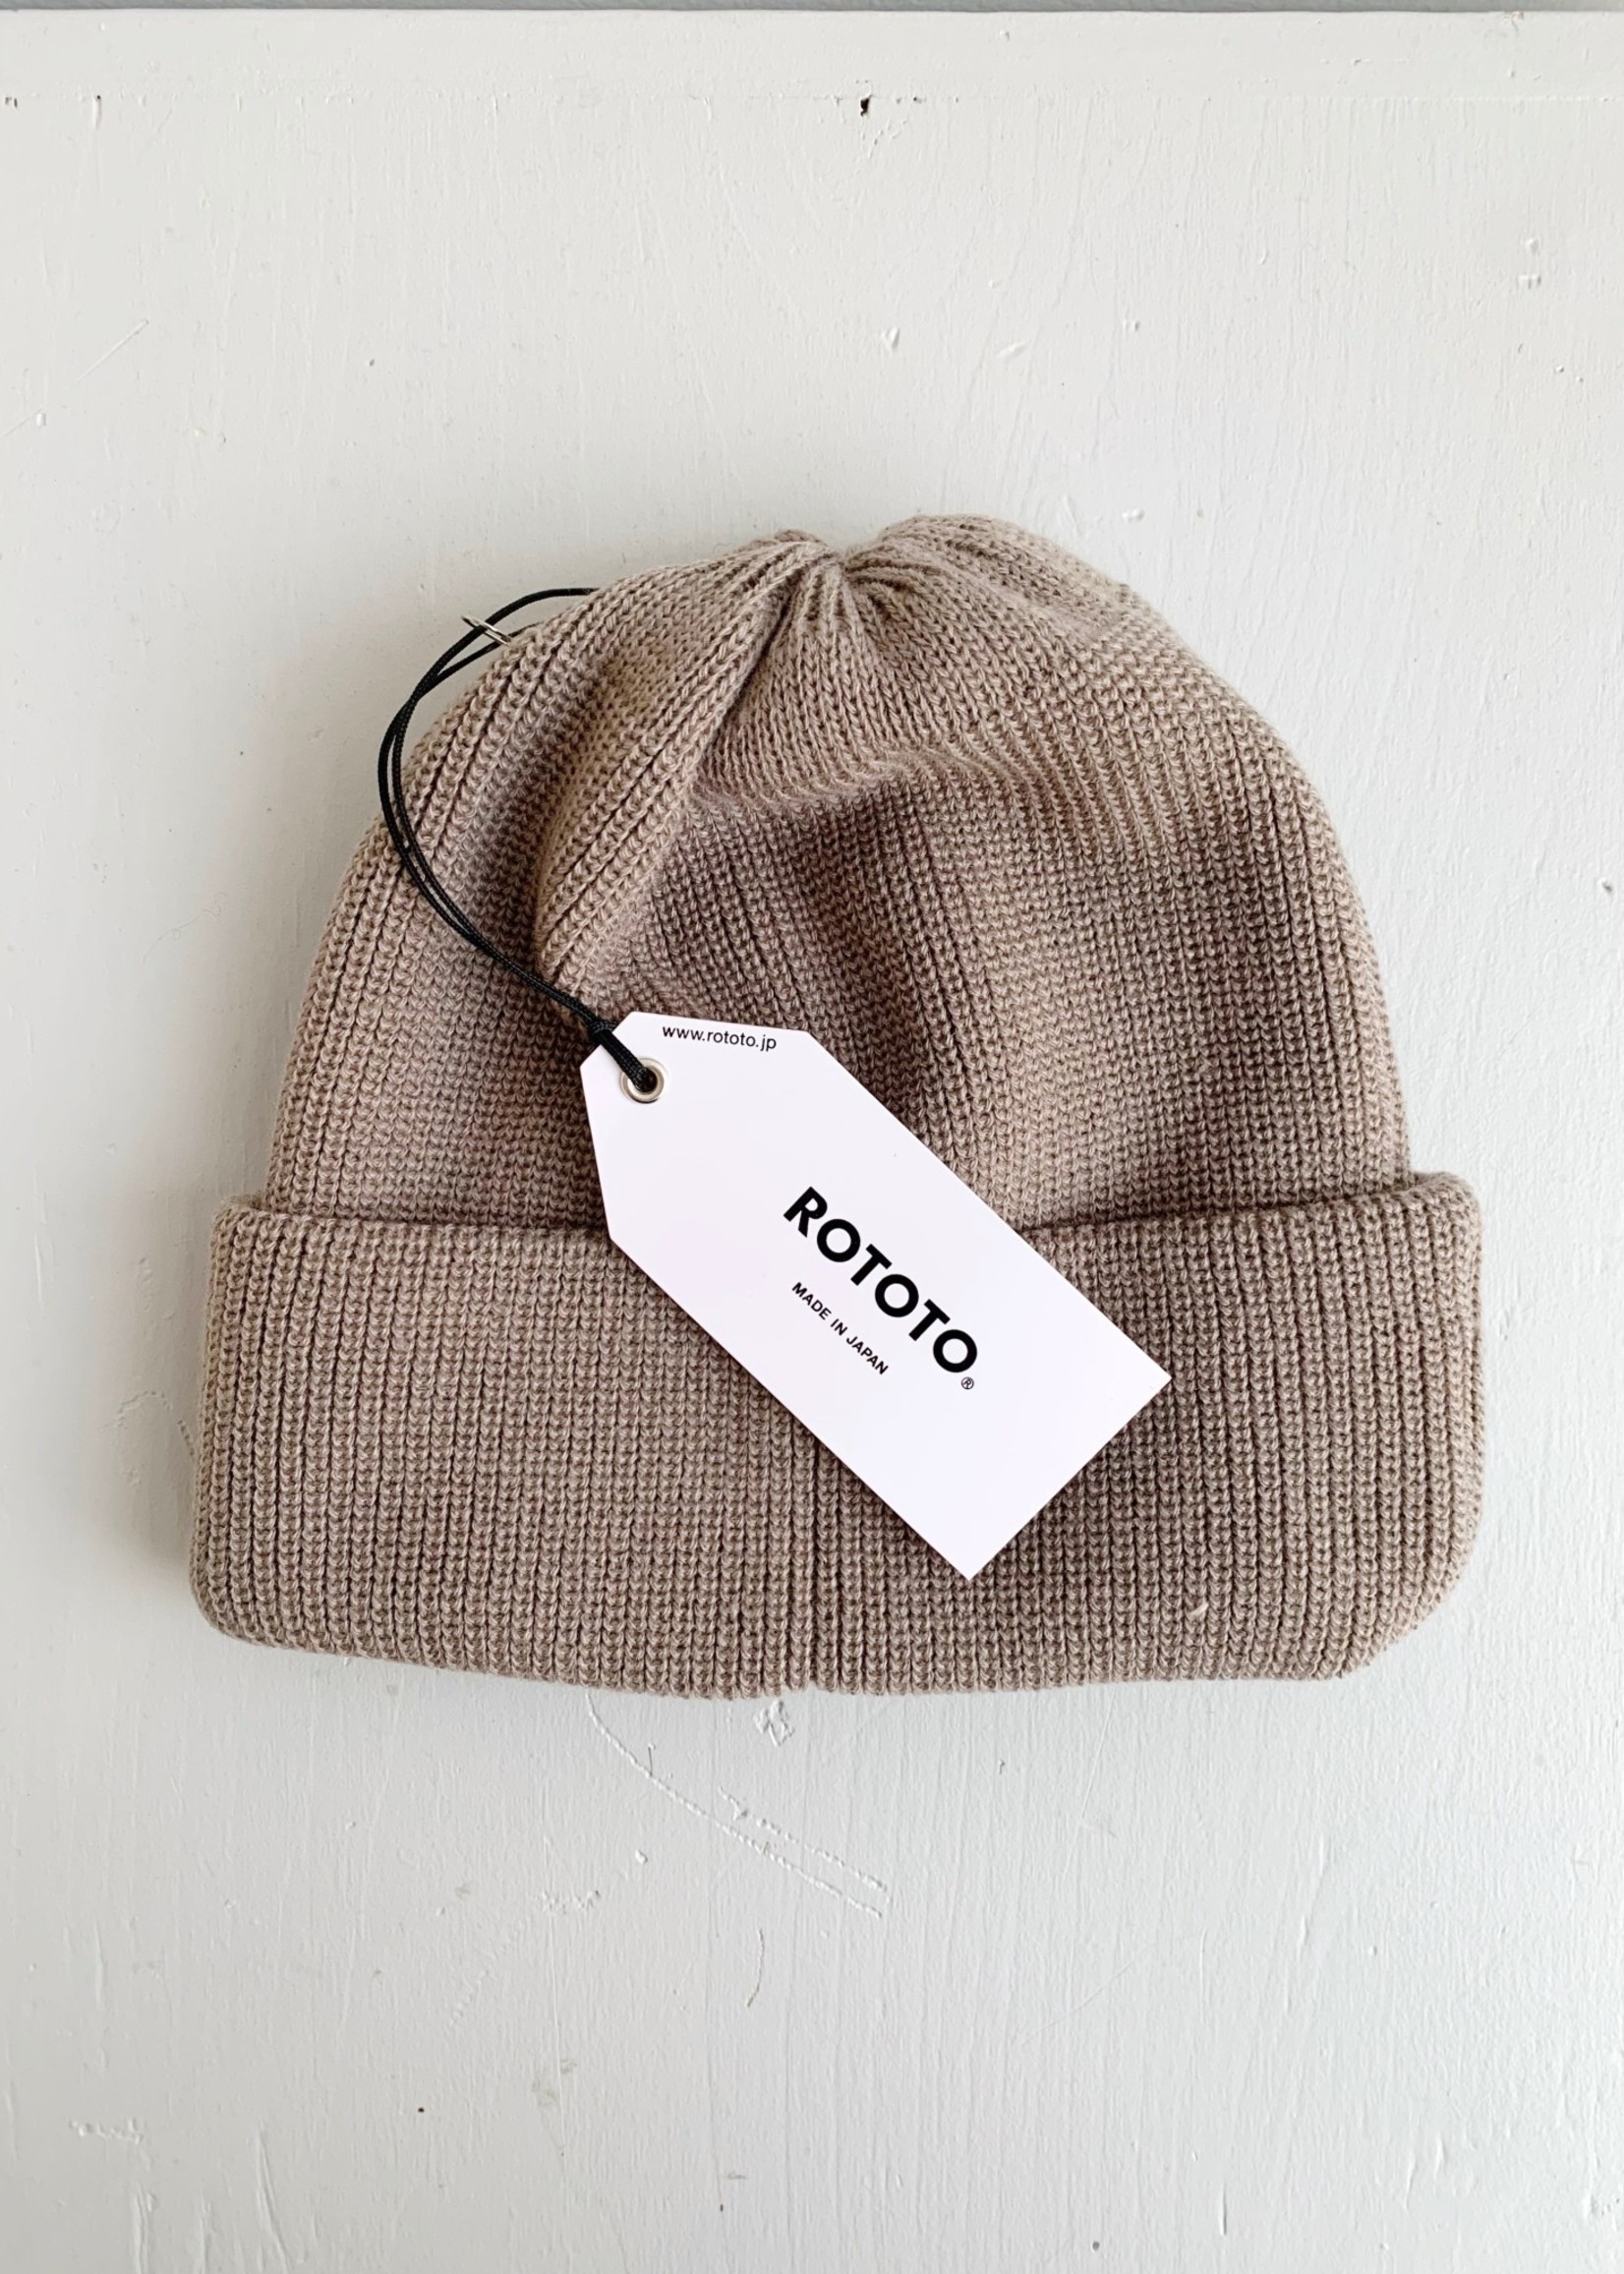 Rototo Bulky Watch Cap Toques by Rototo